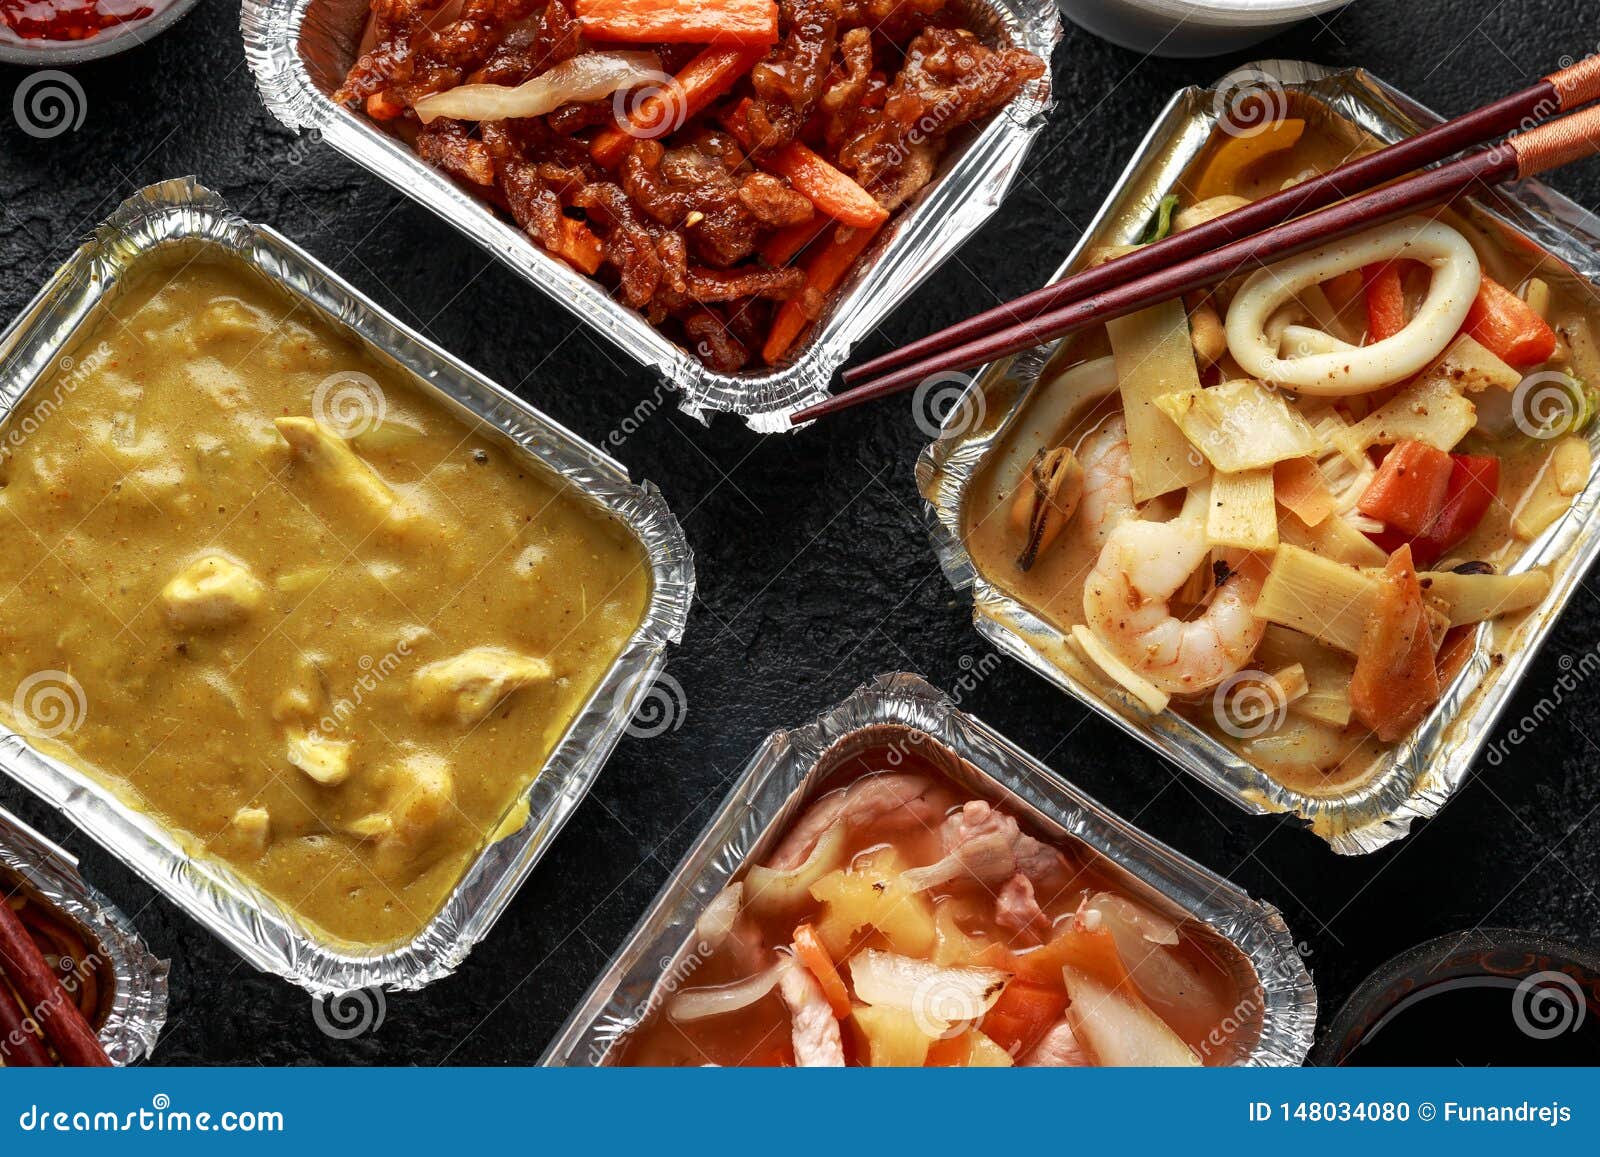 Chinese Takeaway Food Pork Wonton Dumpling Soup Crispy Shredded Beef Sweet And Sour Pineapple Chicken Egg Noodles Stock Photo Image Of Container Food